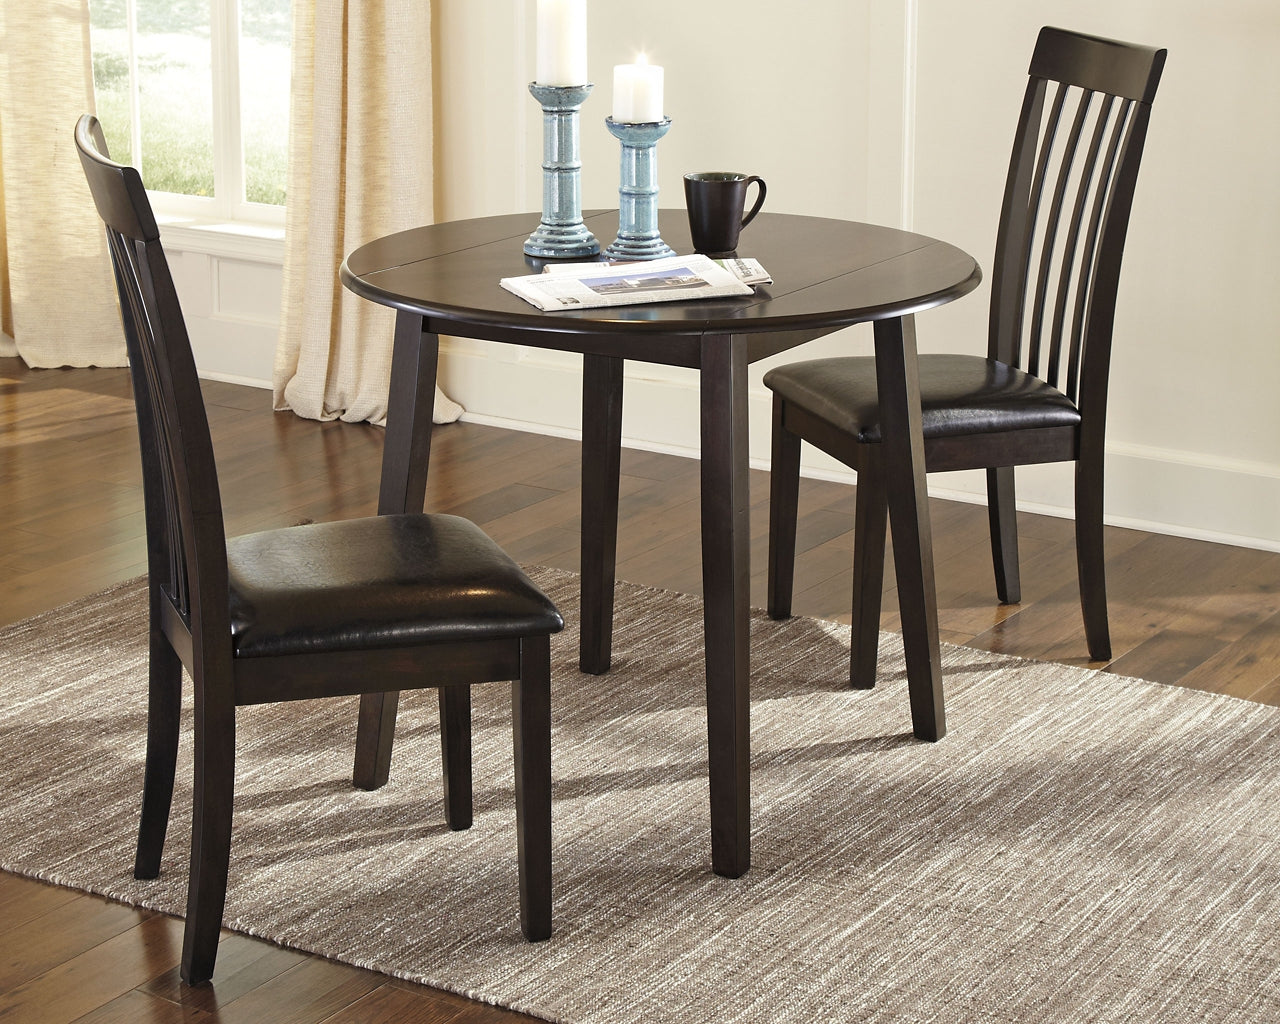 Hammis Dining Table and 2 Chairs Wilson Furniture (OH)  in Bridgeport, Ohio. Serving Bridgeport, Yorkville, Bellaire, & Avondale